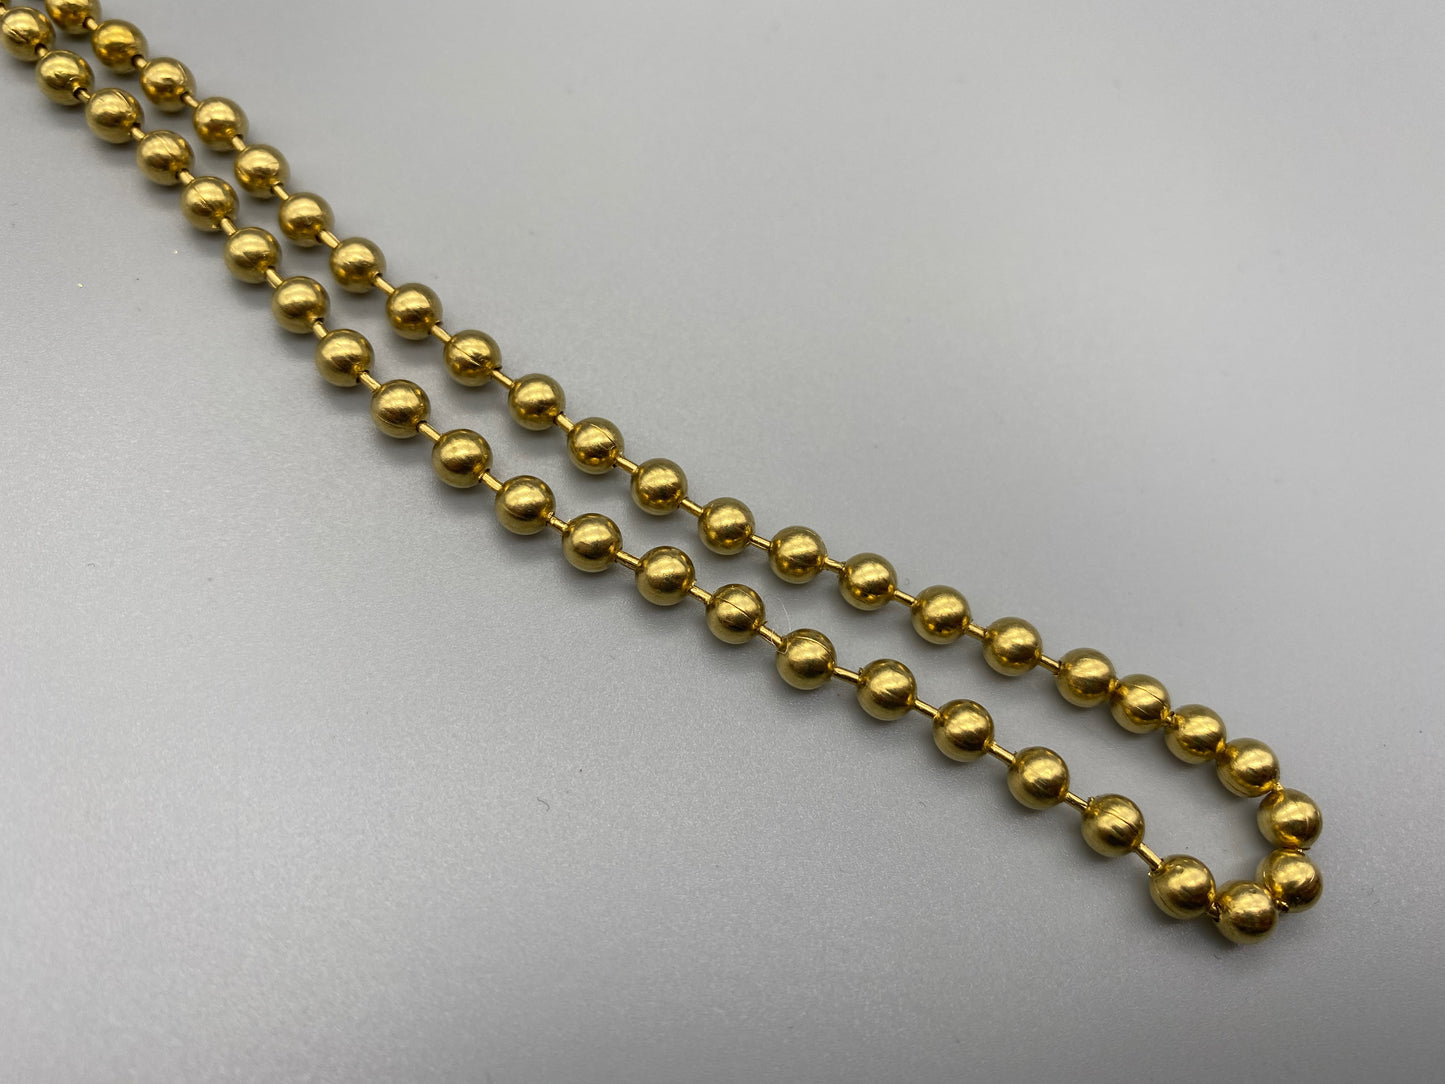 Endless Brass Metal Chain - No.10 Bead Size: 4.5mm Loop